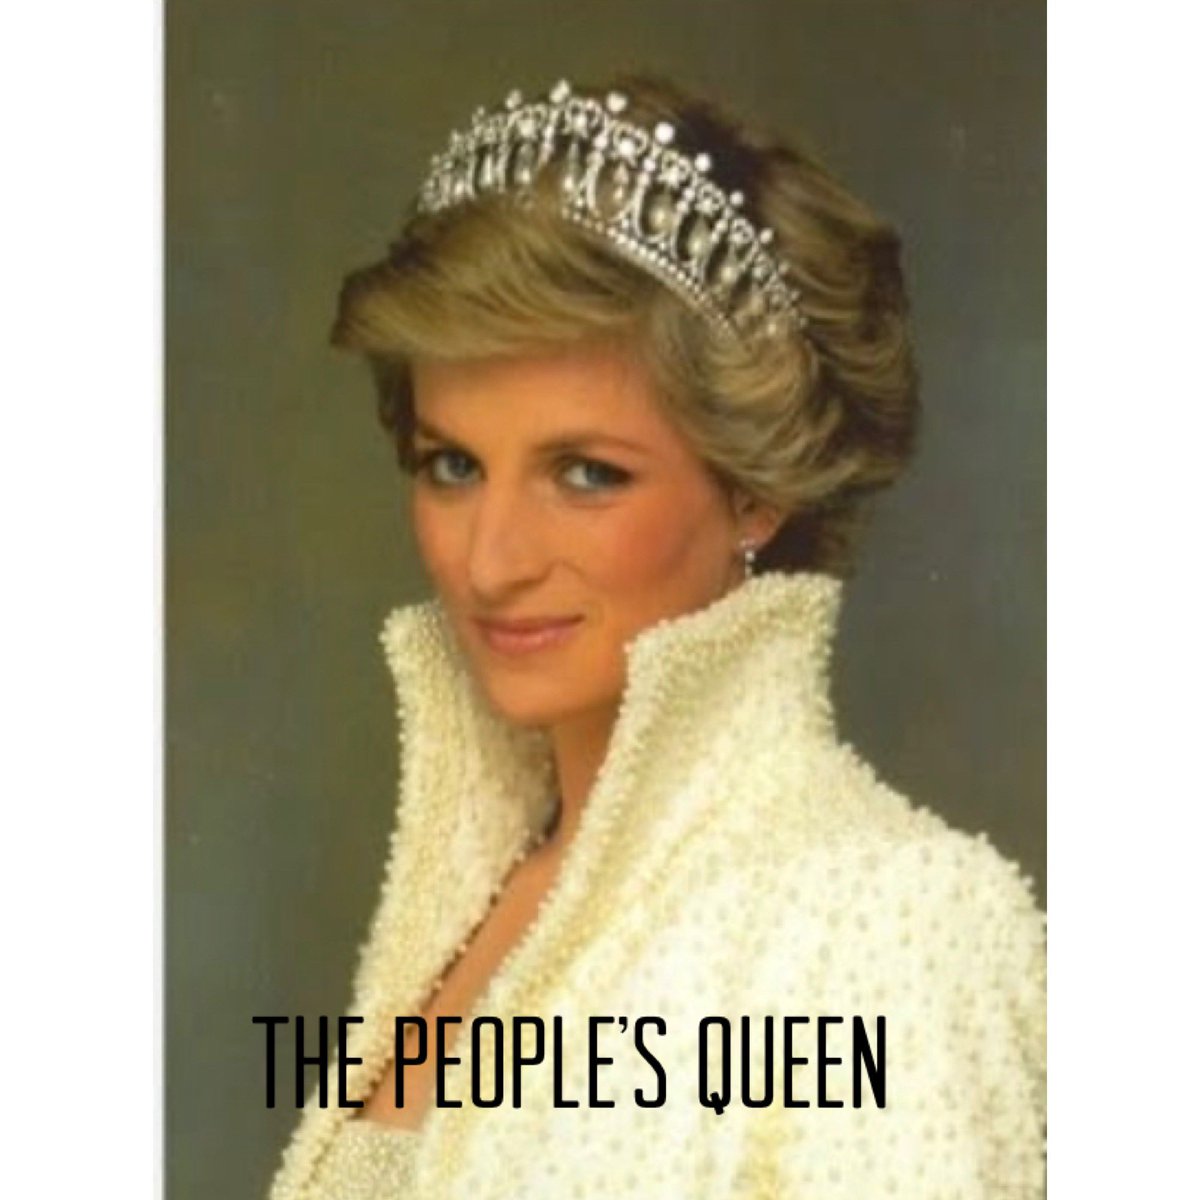 We will always prefer Diana over Camilla. #QueenDiana #PrincessDiana #QueenConsort #royal #TheCrown #KingCharles #Coronation2023 #thepeoplesprincess to #thepeoplesqueen  #PrinceHarry #PrinceWilliam